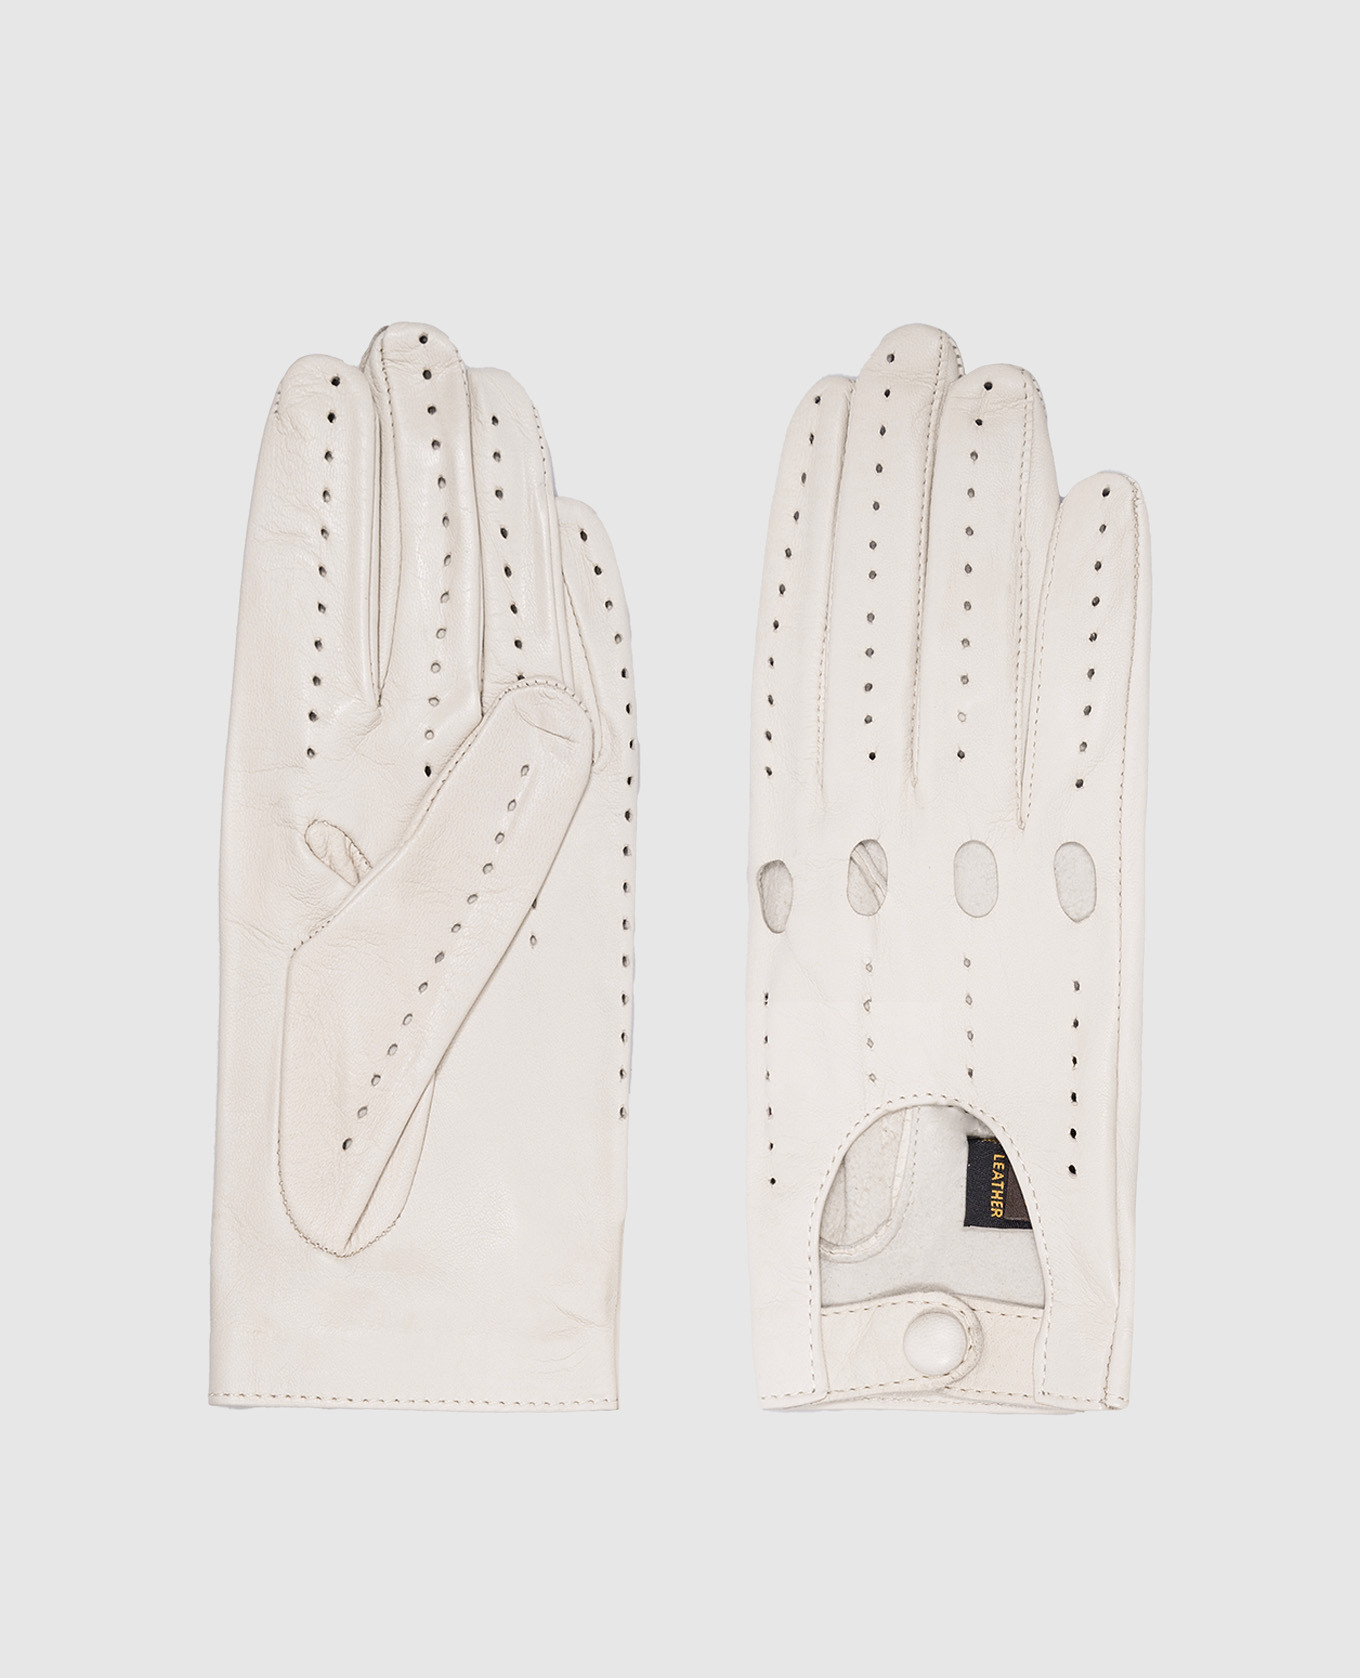 Beige leather gloves with perforation